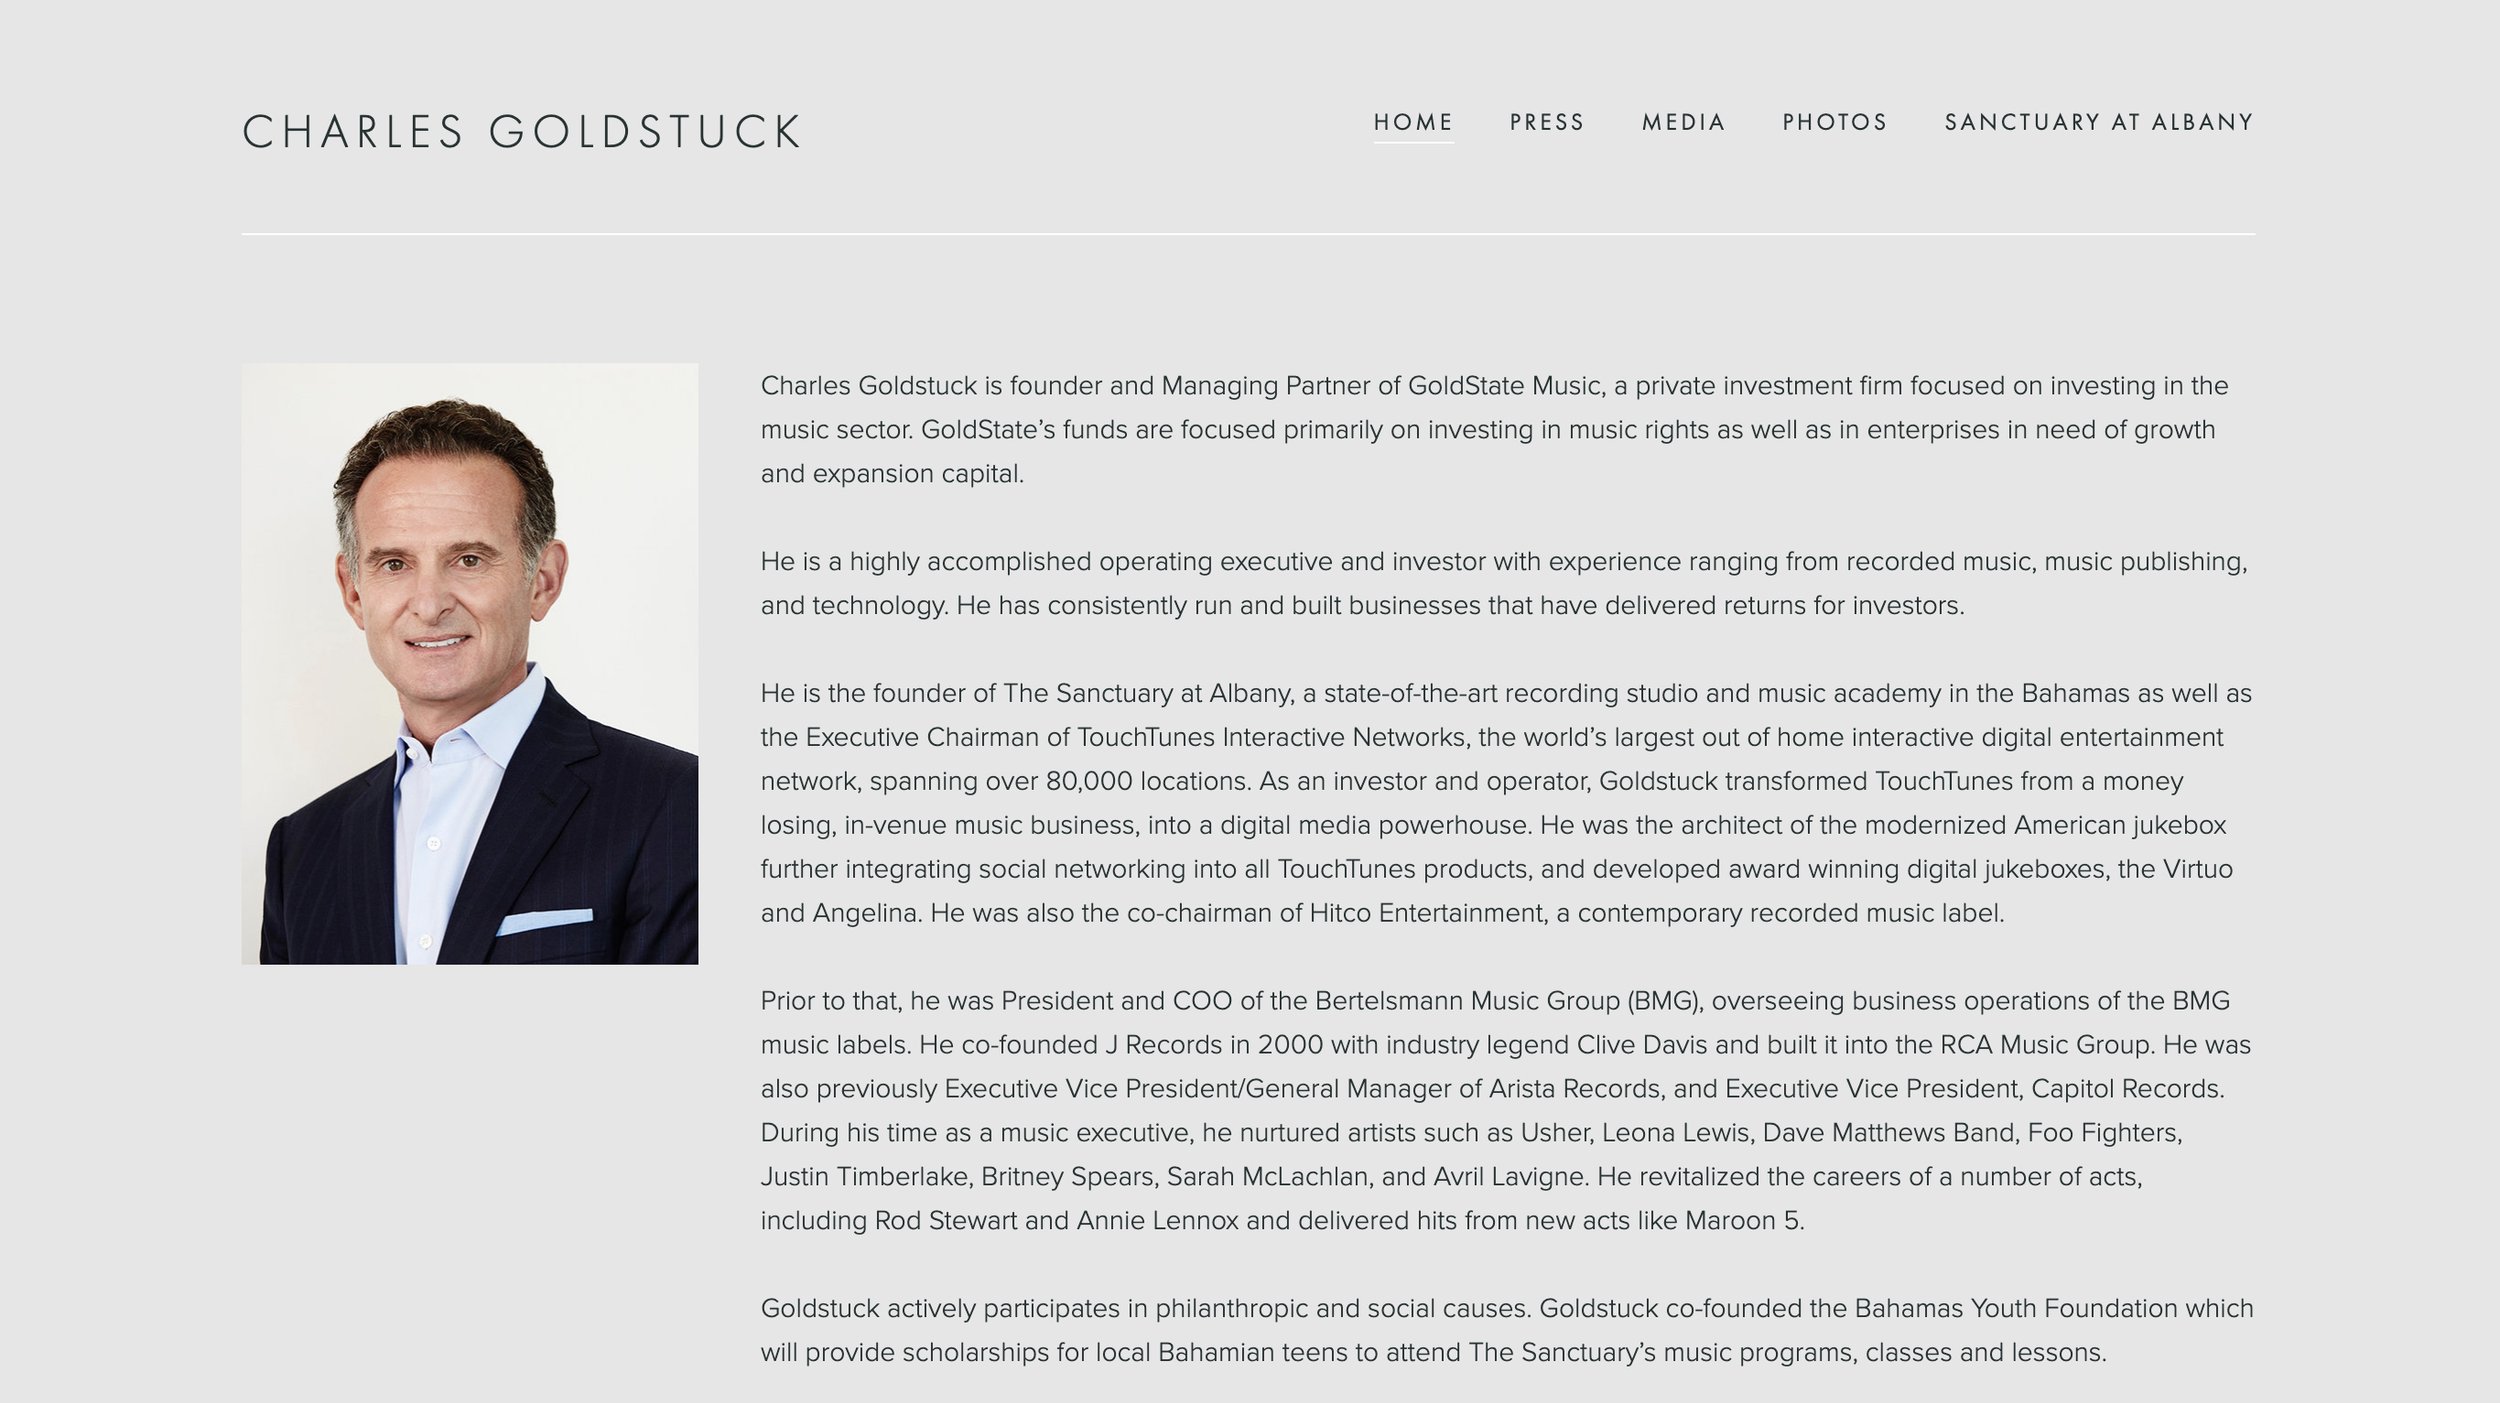 CHARLES GOLDSTUCK: FOUNDER AND CO-CHAIRMAN OF HITCO ENTERTAINMENT